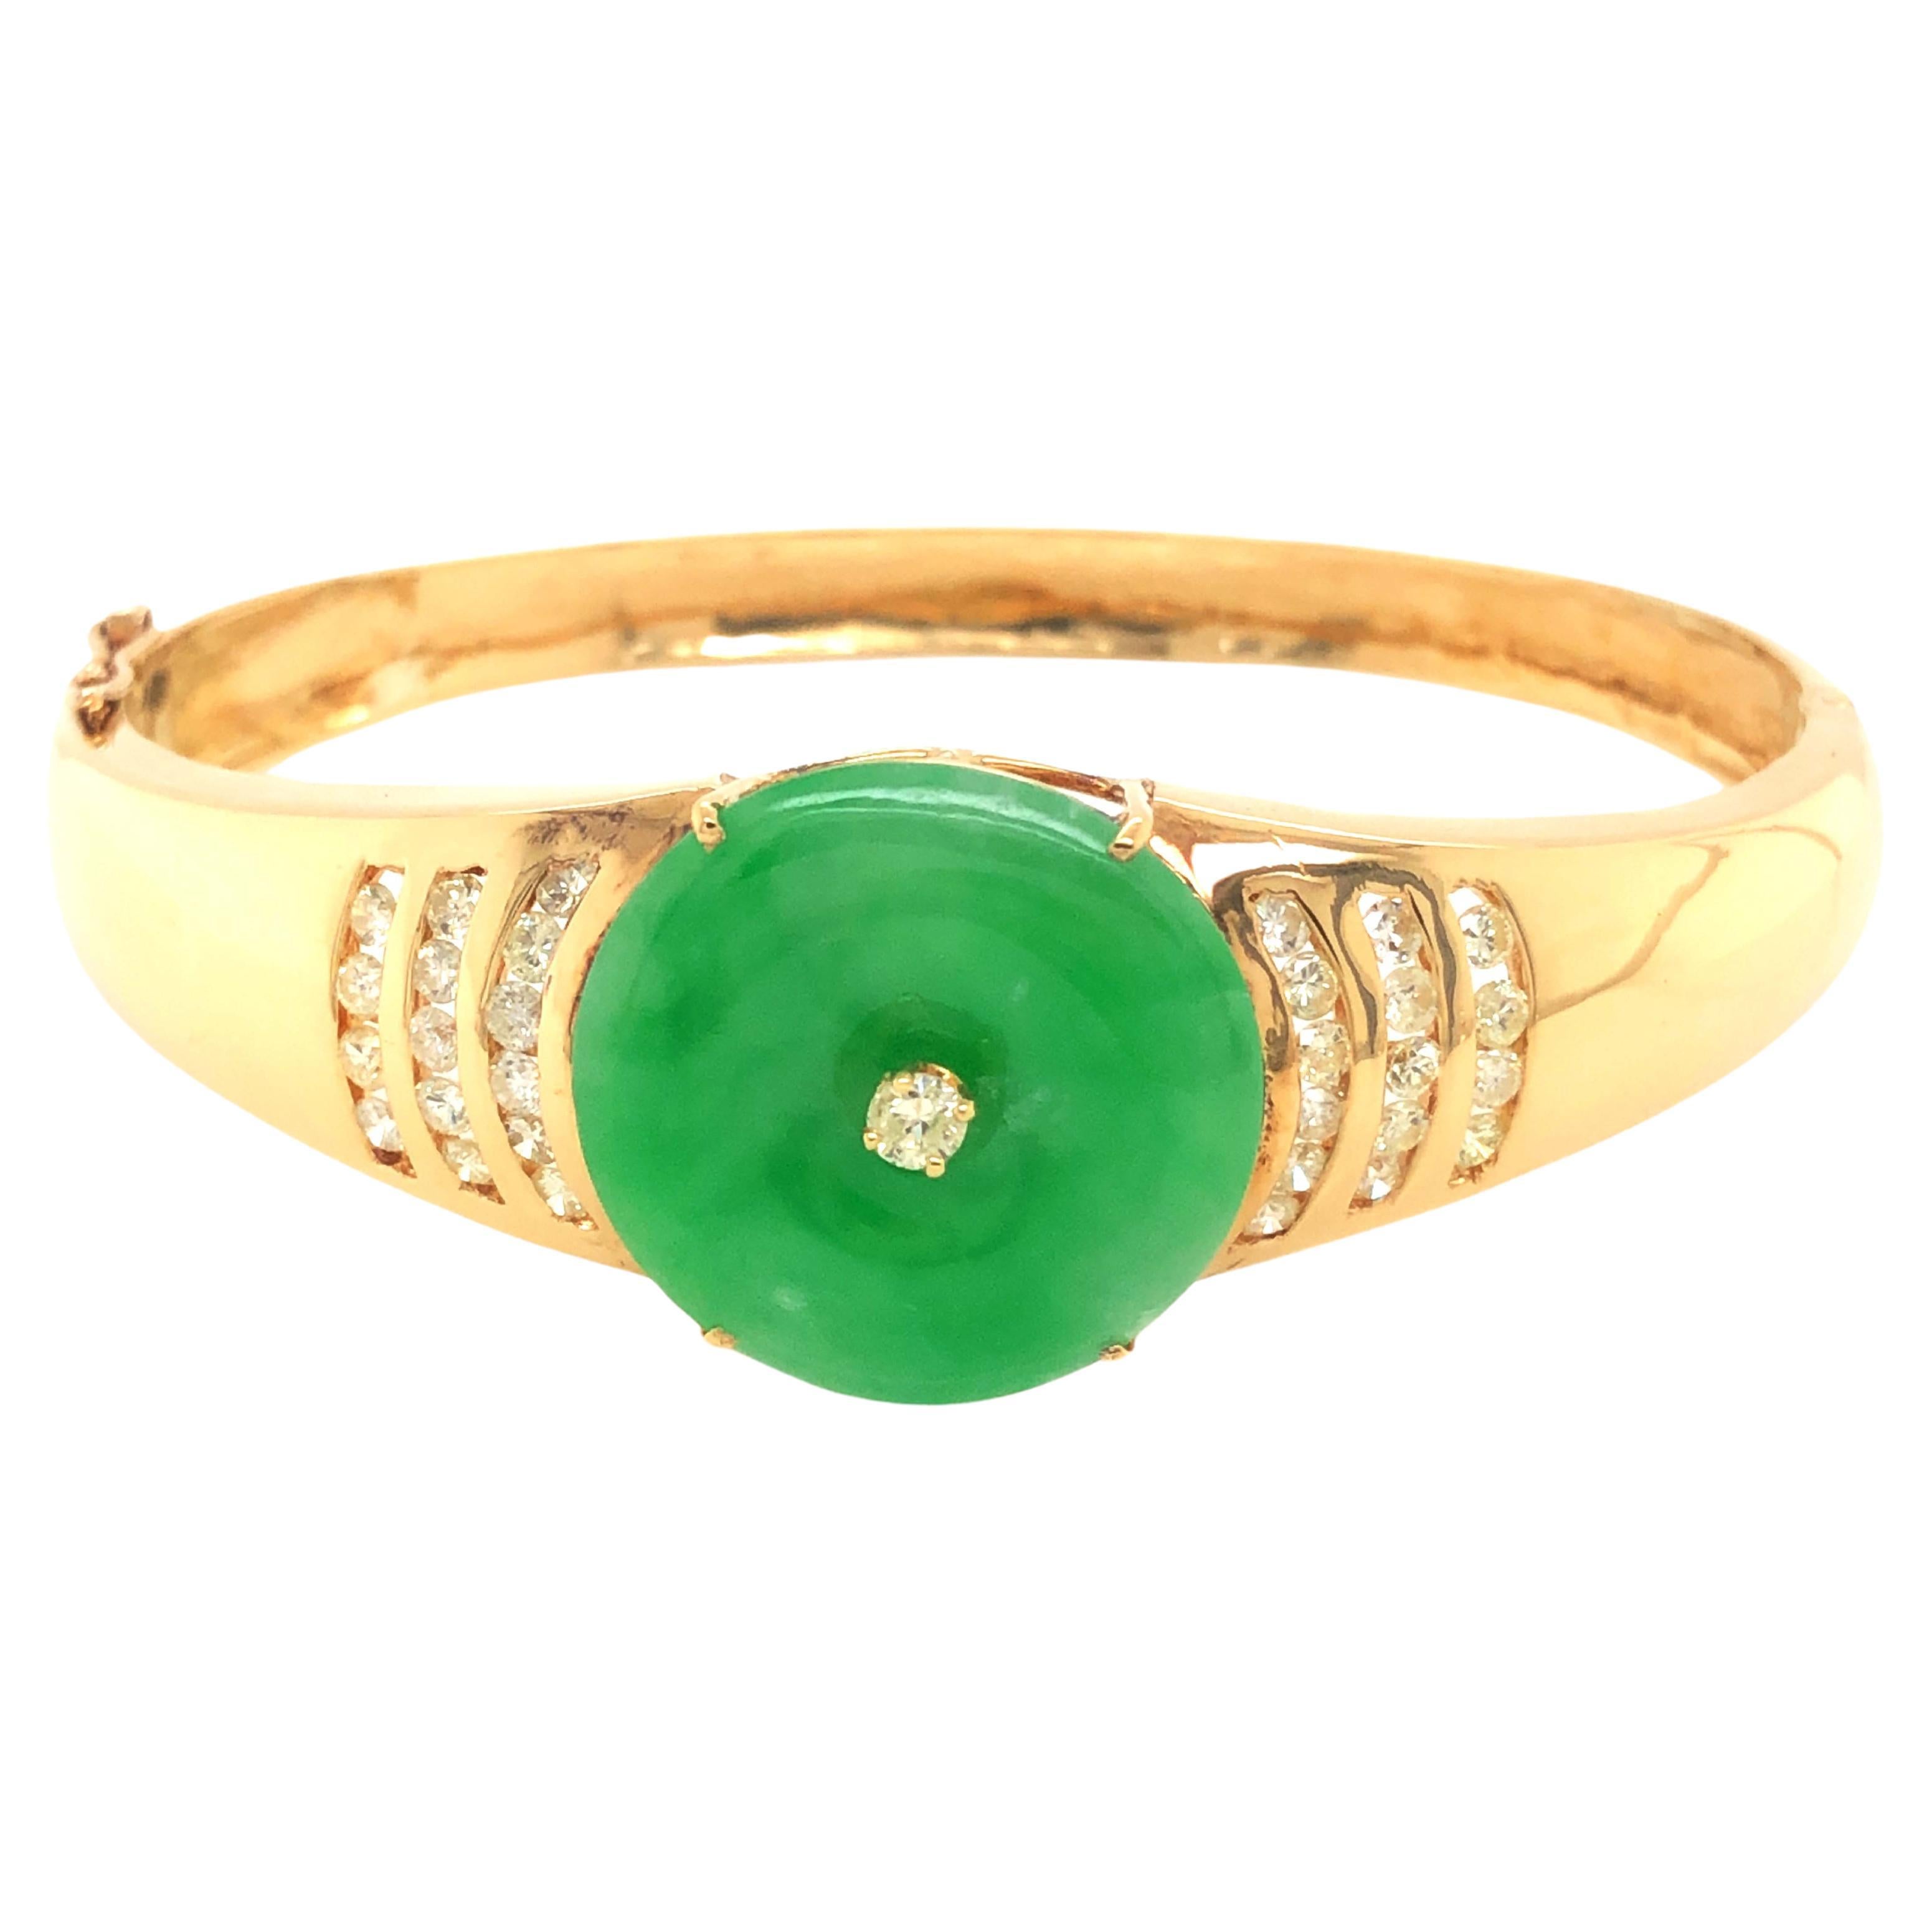 Green Jadeite Jade and Diamond Hinged Bangle Bracelet in 18k Yellow Gold For Sale